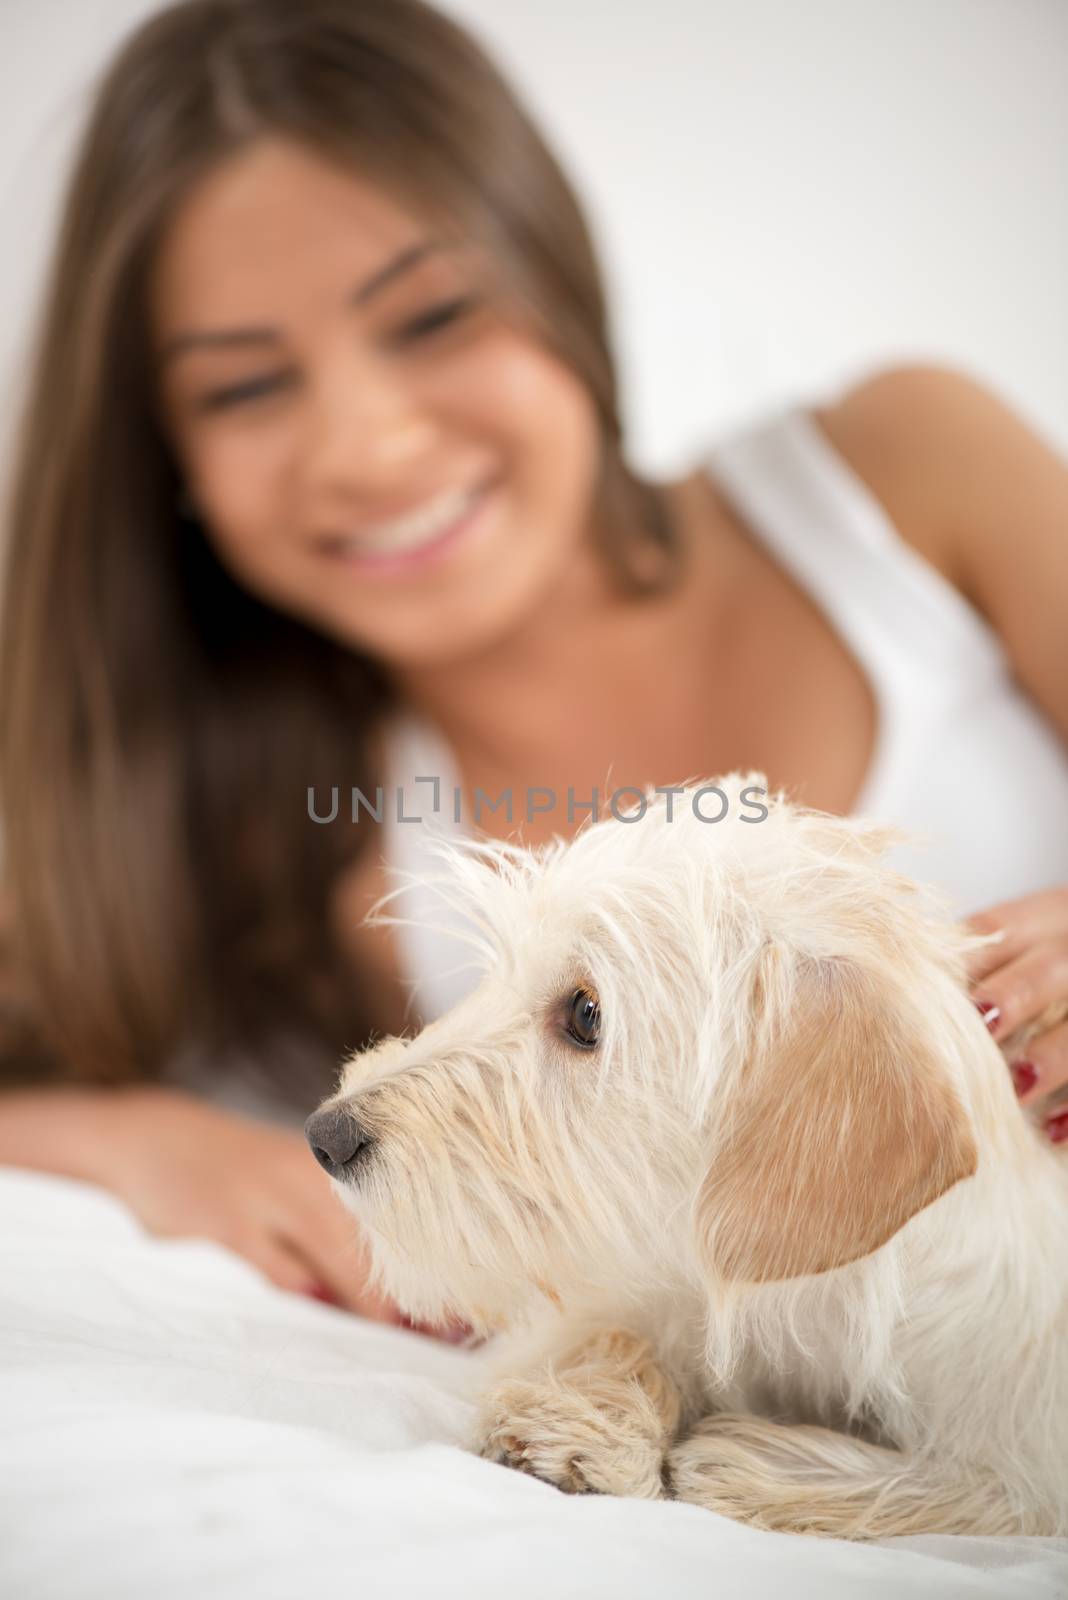 Cute Girl And Dog In The Morning by MilanMarkovic78